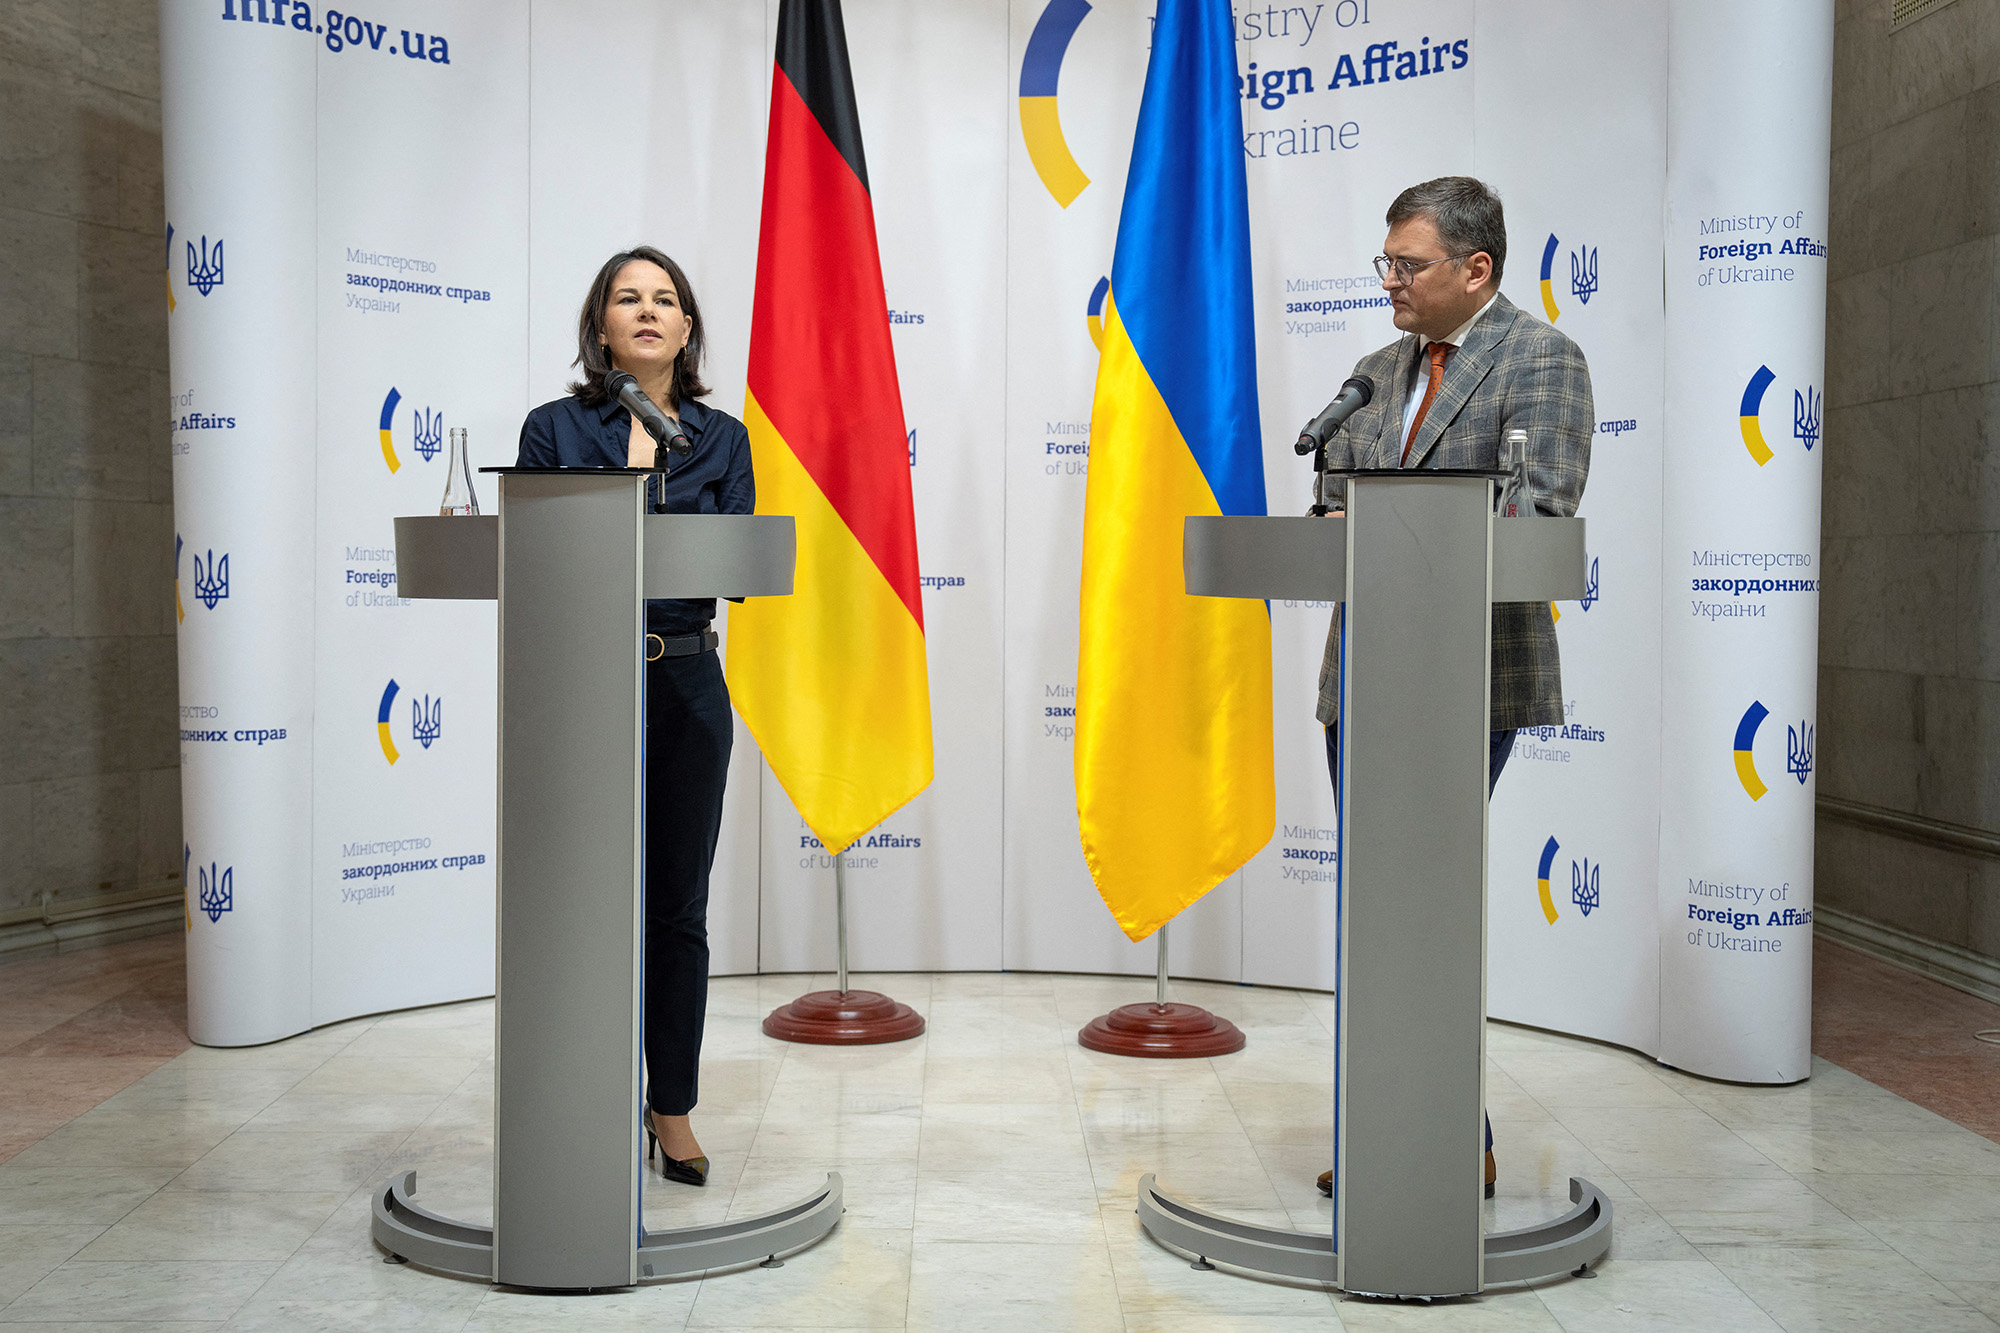 German Foreign Minister Annalena Baerbock, left, and Ukrainian Foreign Minister Dmytro Kuleba attend a joint press conference following their talks in Kyiv, Ukraine, on September 11.